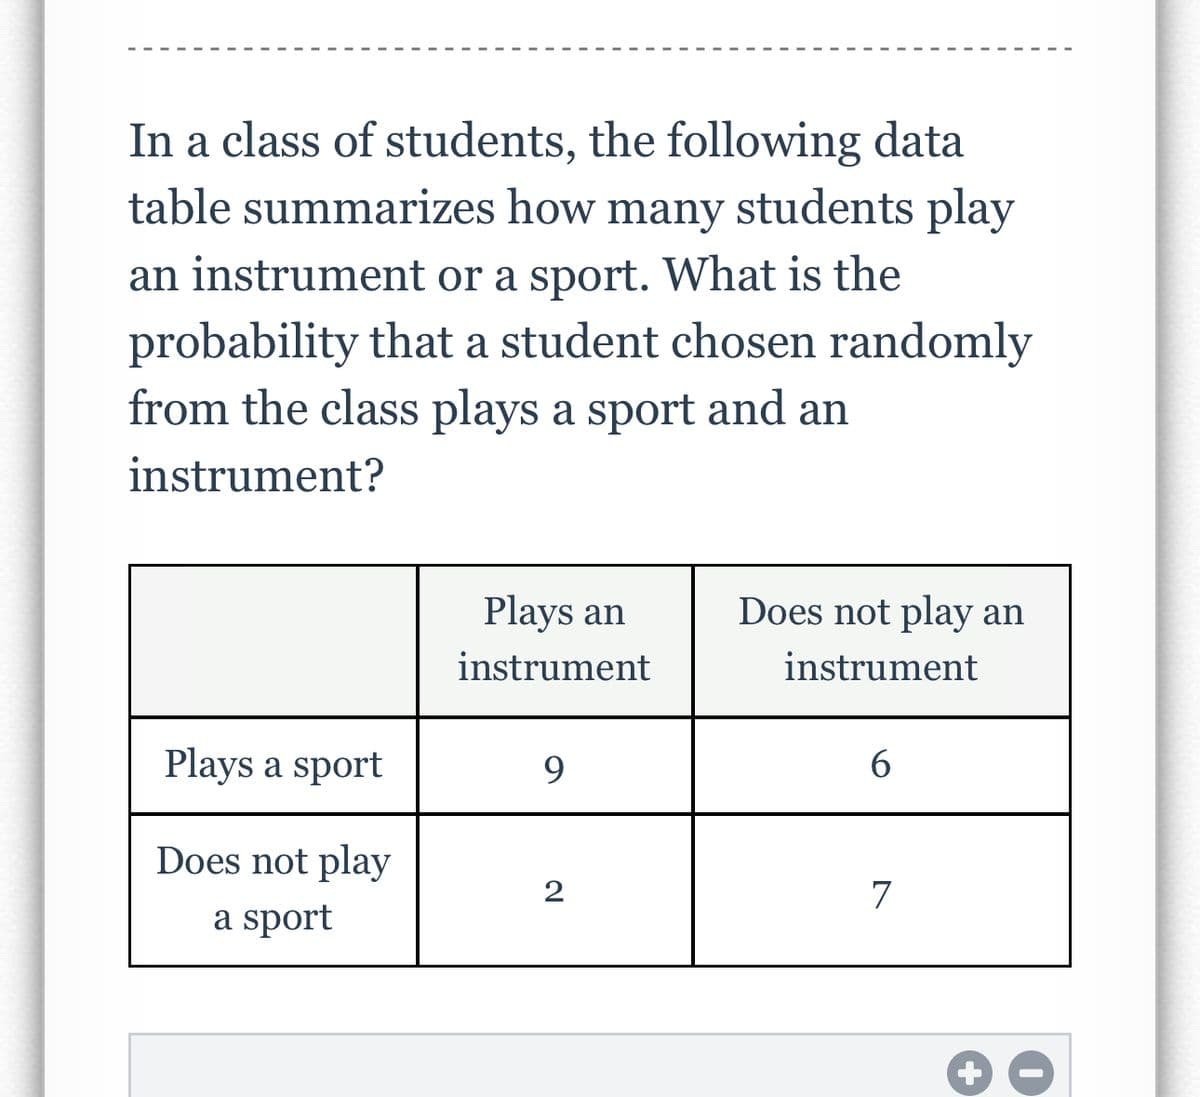 In a class of students, the following data
table summarizes how many students play
an instrument or a sport. What is the
probability that a student chosen randomly
from the class plays a sport and an
instrument?
Plays a sport
Does not play
a sport
Plays an
instrument
9
2
Does not play an
instrument
6
7